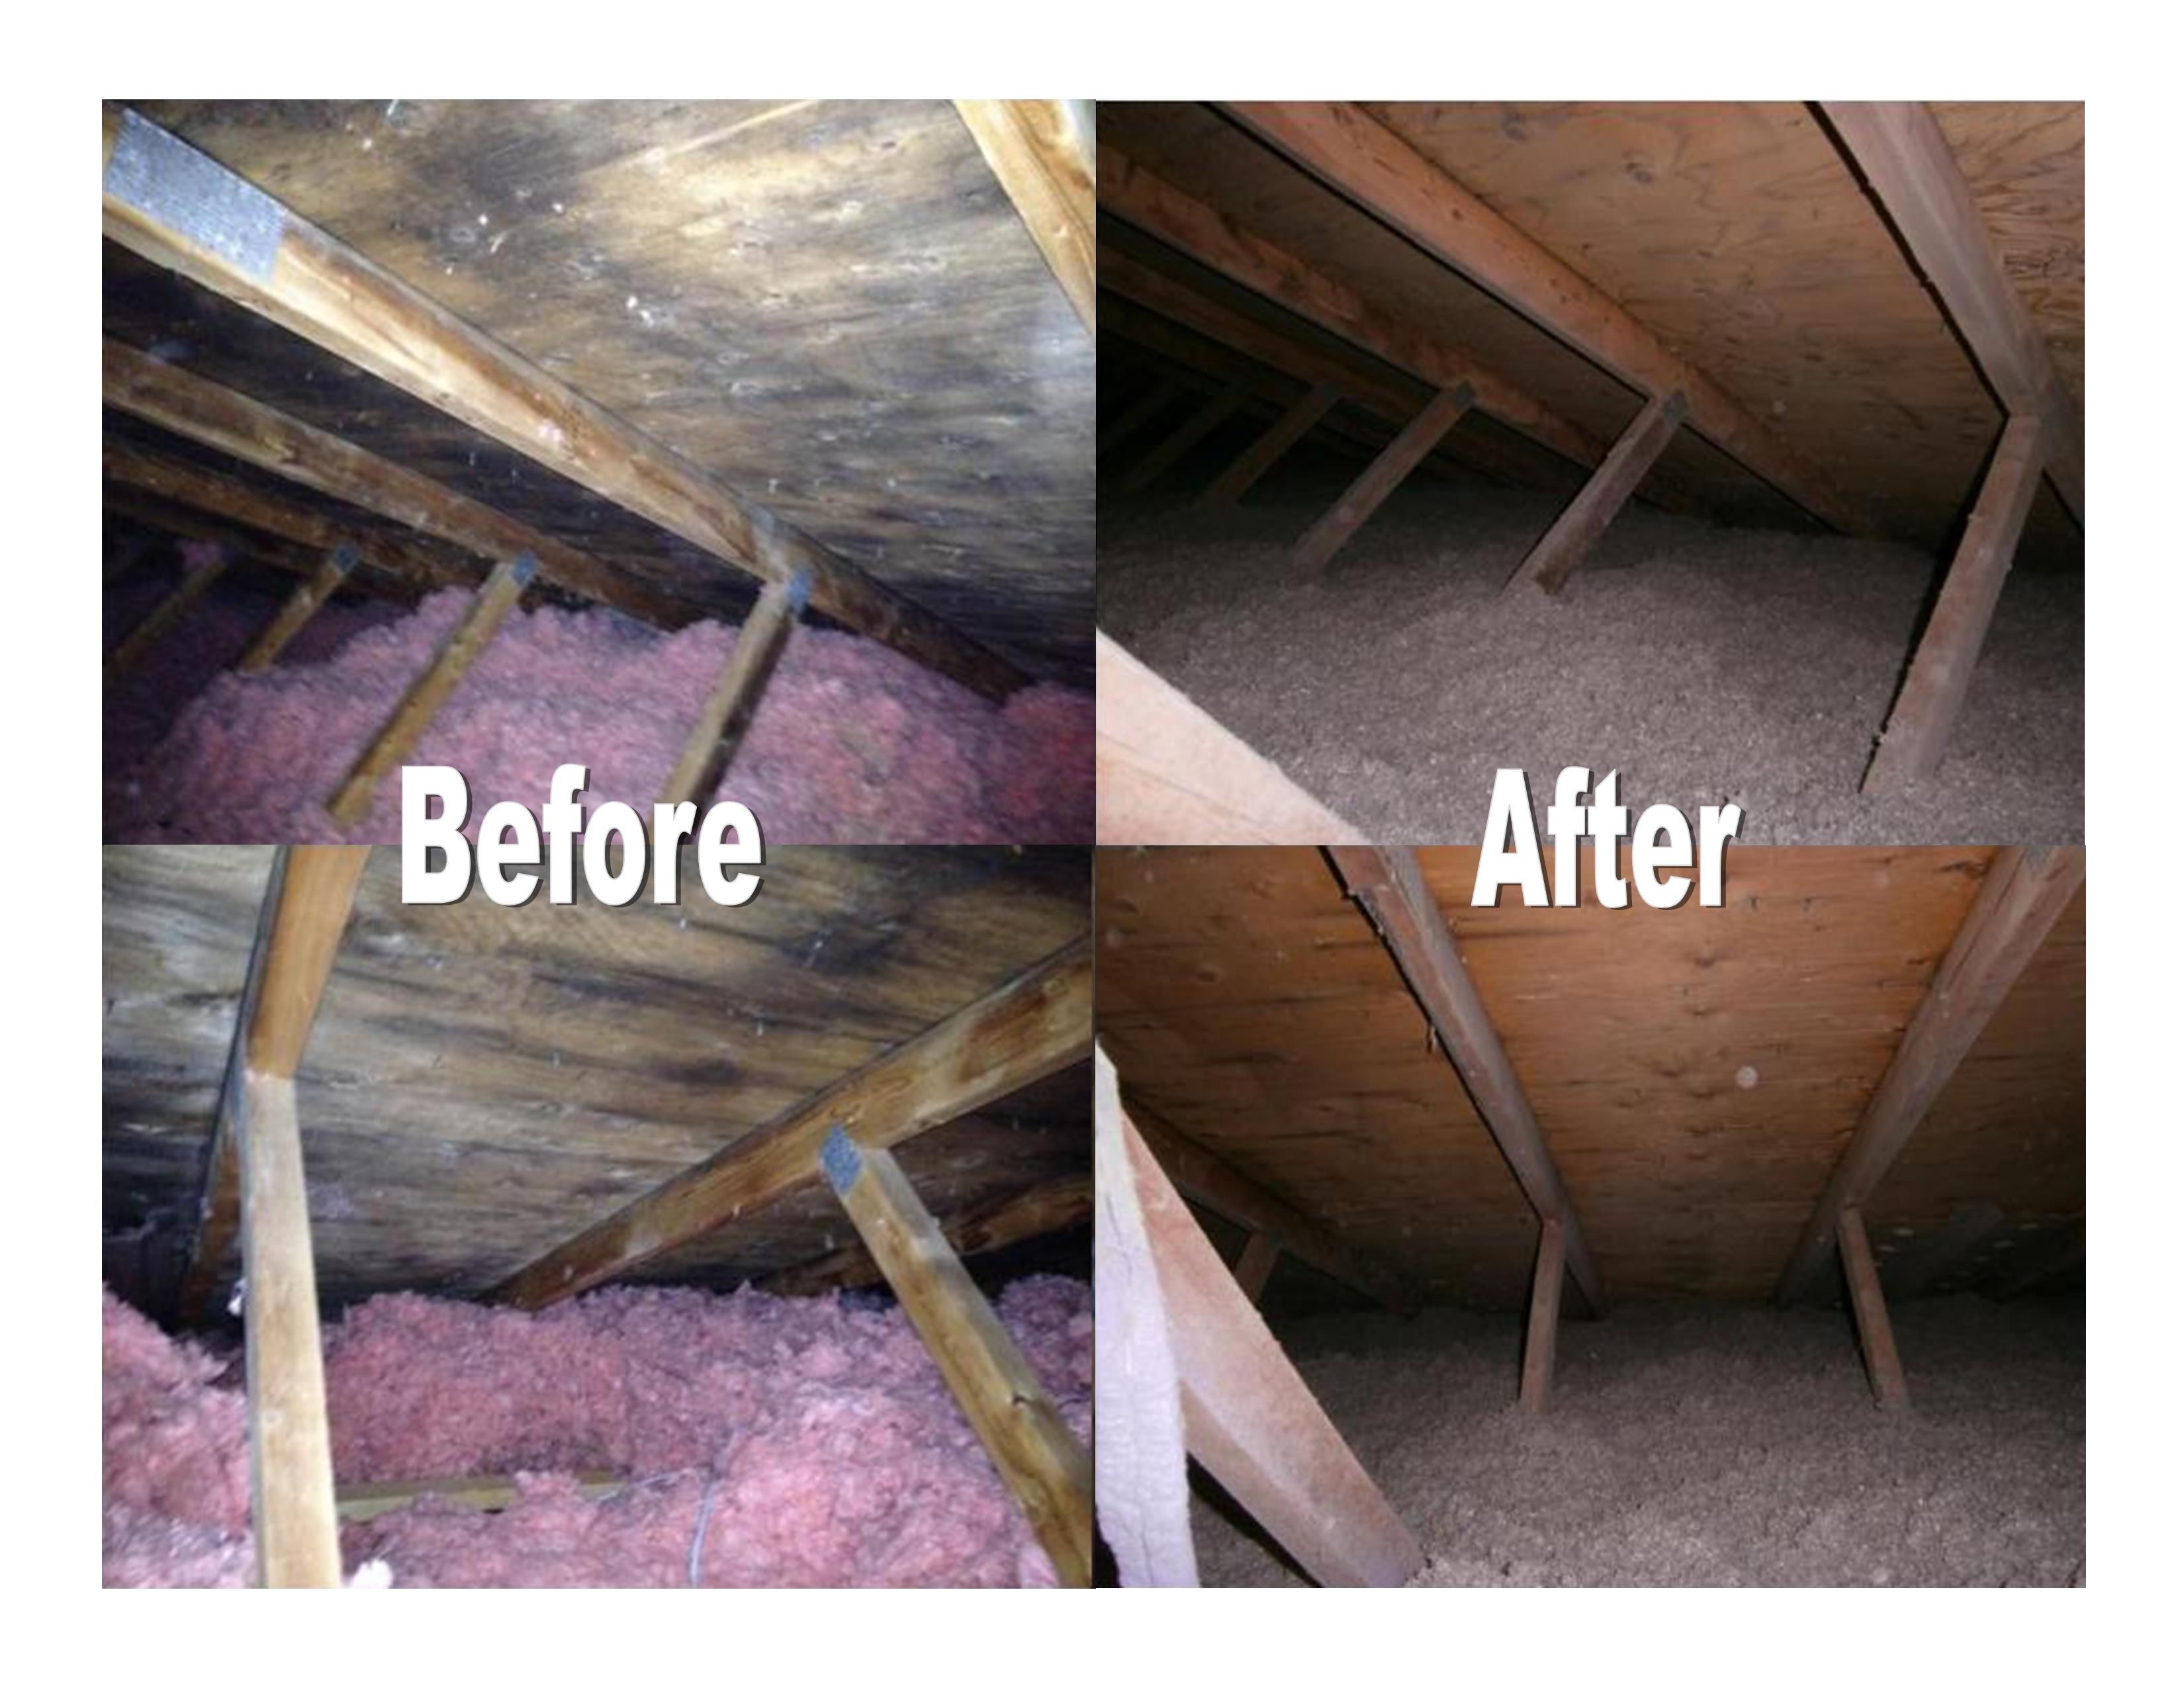 TORONTO MOLD REMOVAL ATTIC - Before and After